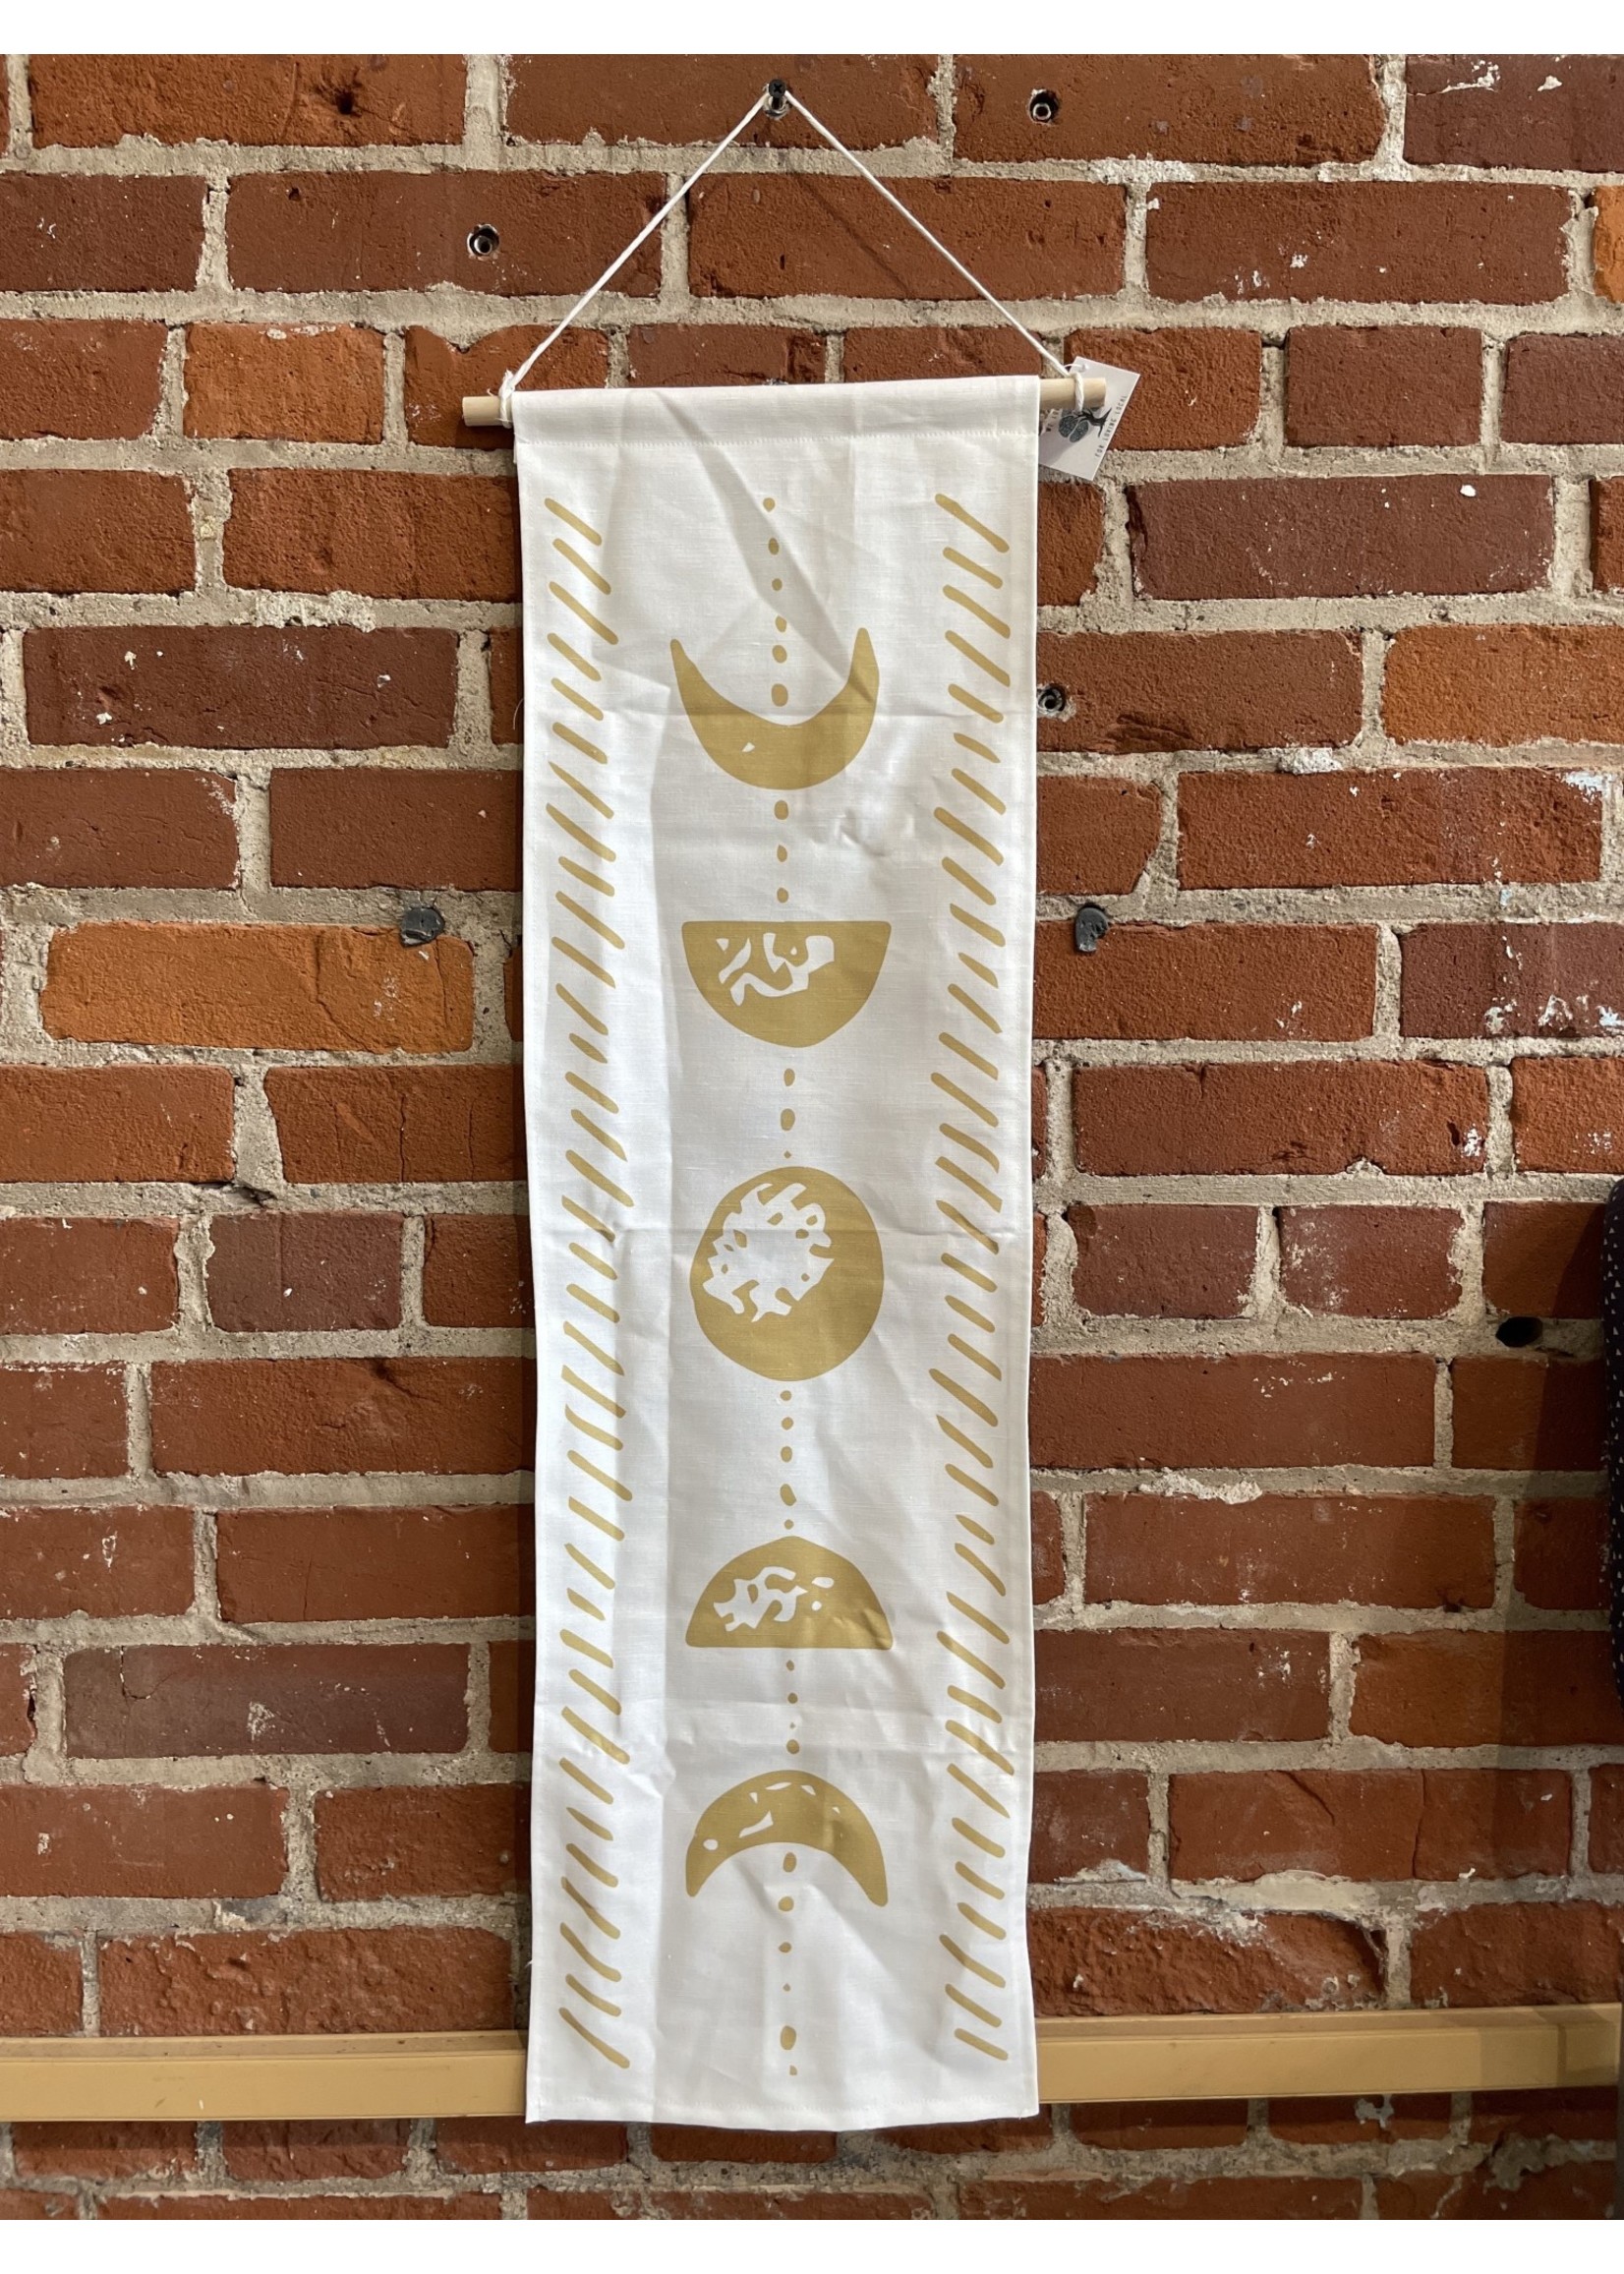 Tangled Up In Hue Fabric Banner Moon Phase